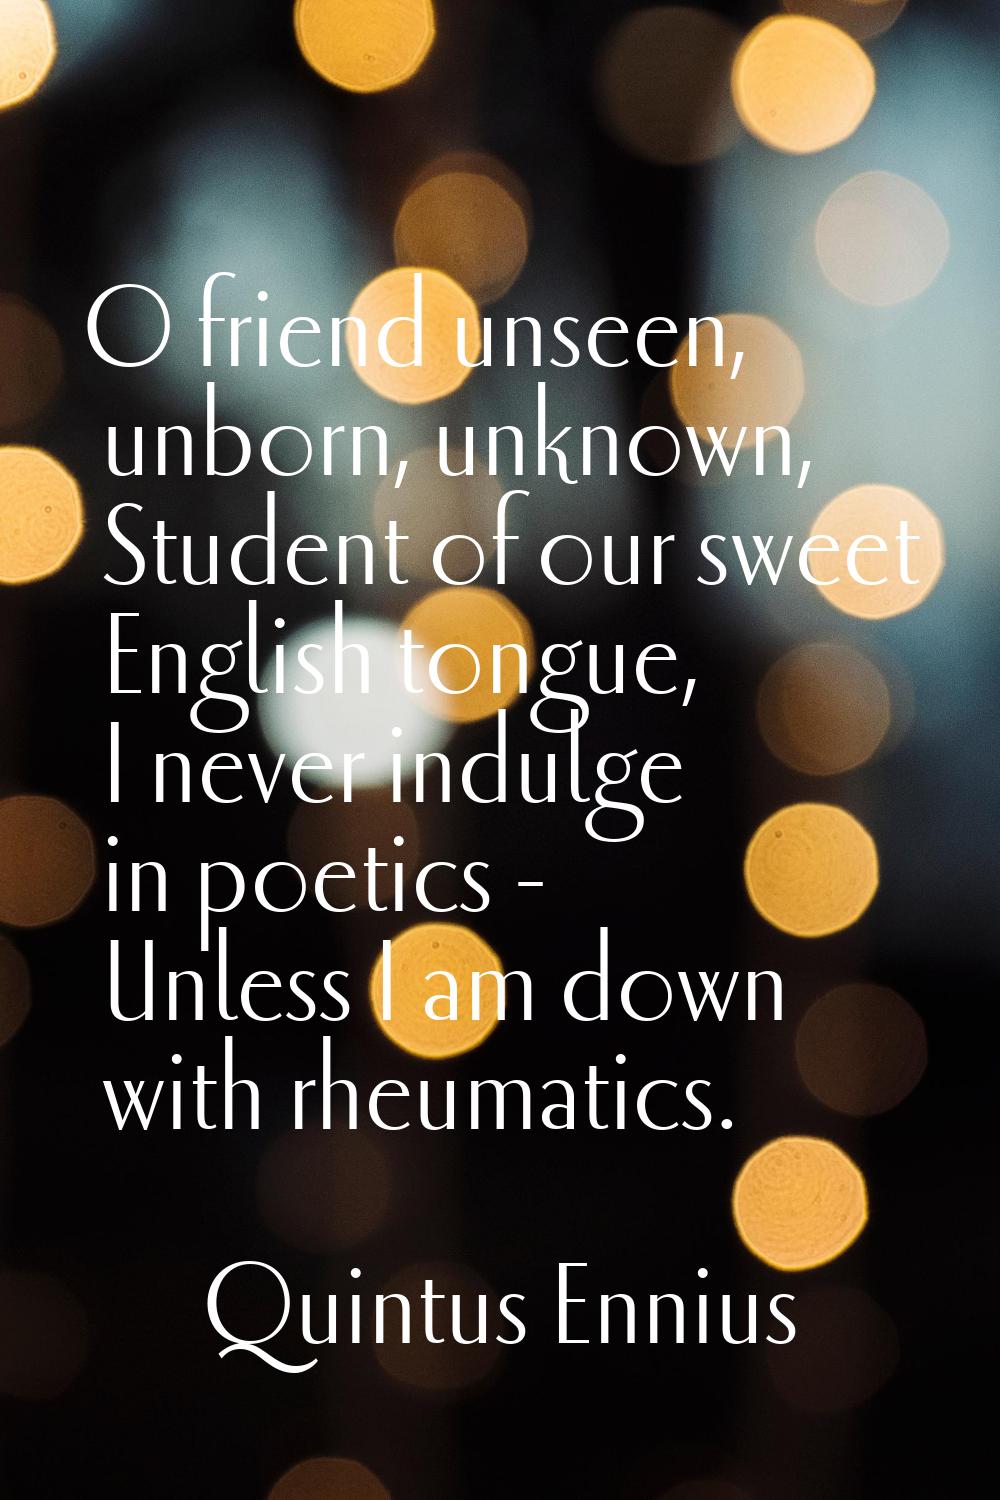 O friend unseen, unborn, unknown, Student of our sweet English tongue, I never indulge in poetics -